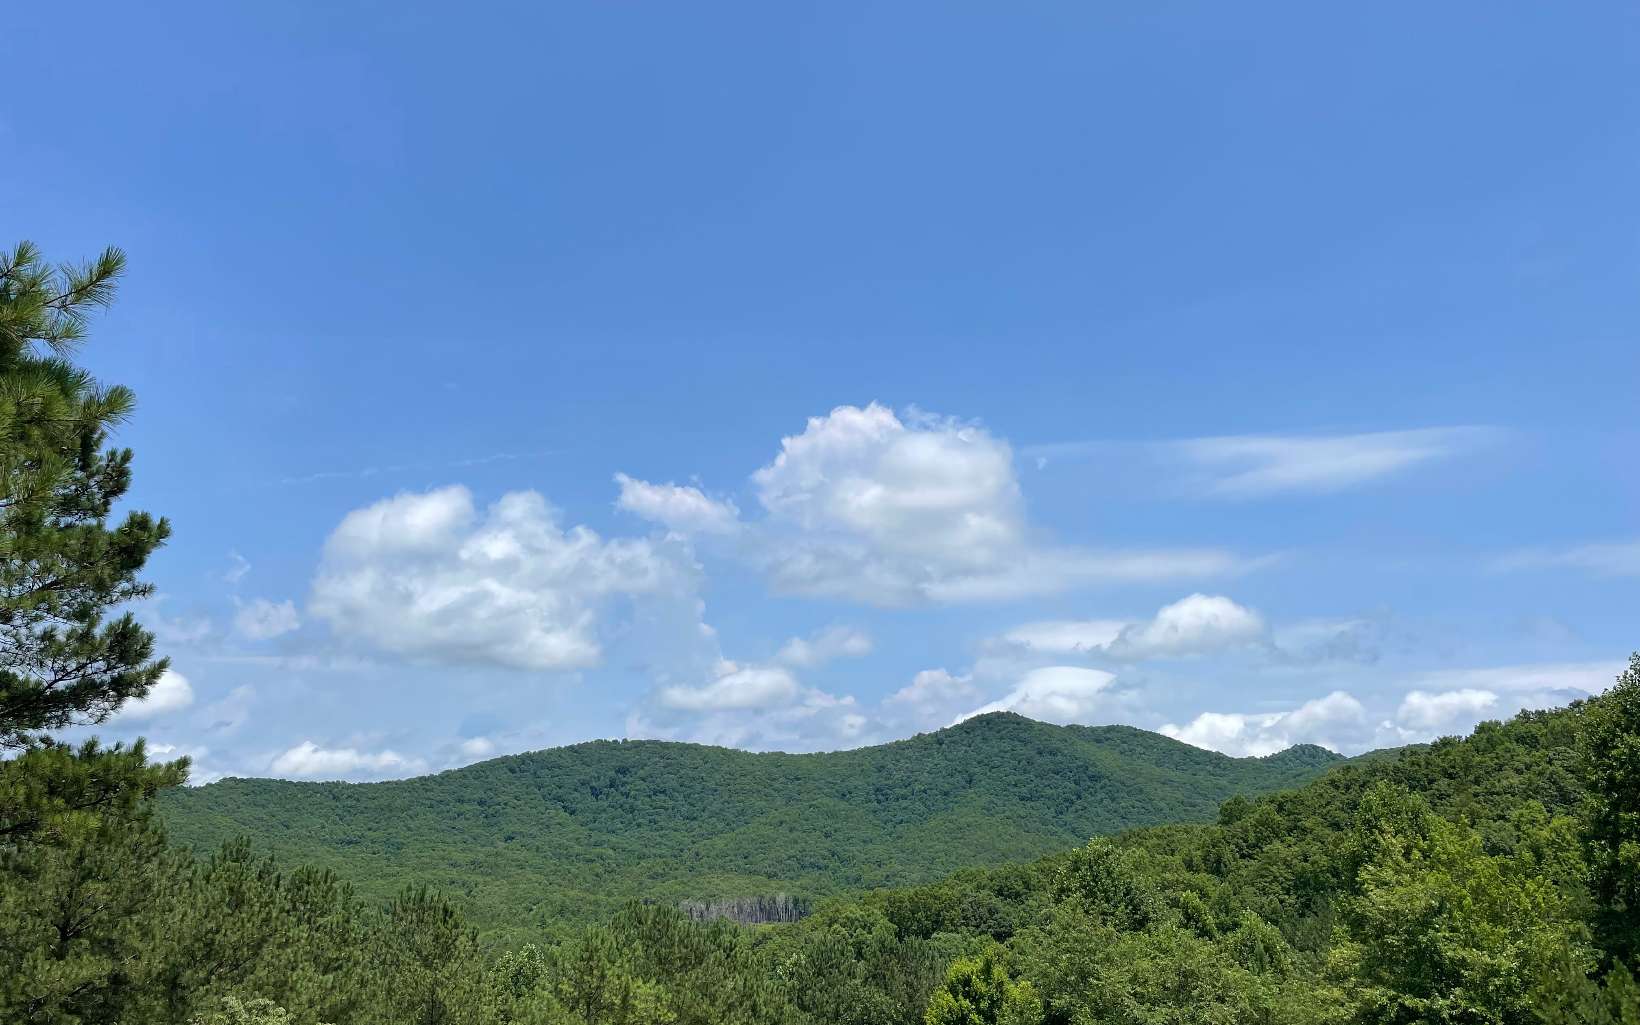 WOW...this has breathtaking views of Union county and only minutes from downtown. 2 minutes from Nottely Marina. Come build your dream home on this amazing lot and enjoy the views. No HOA fees...